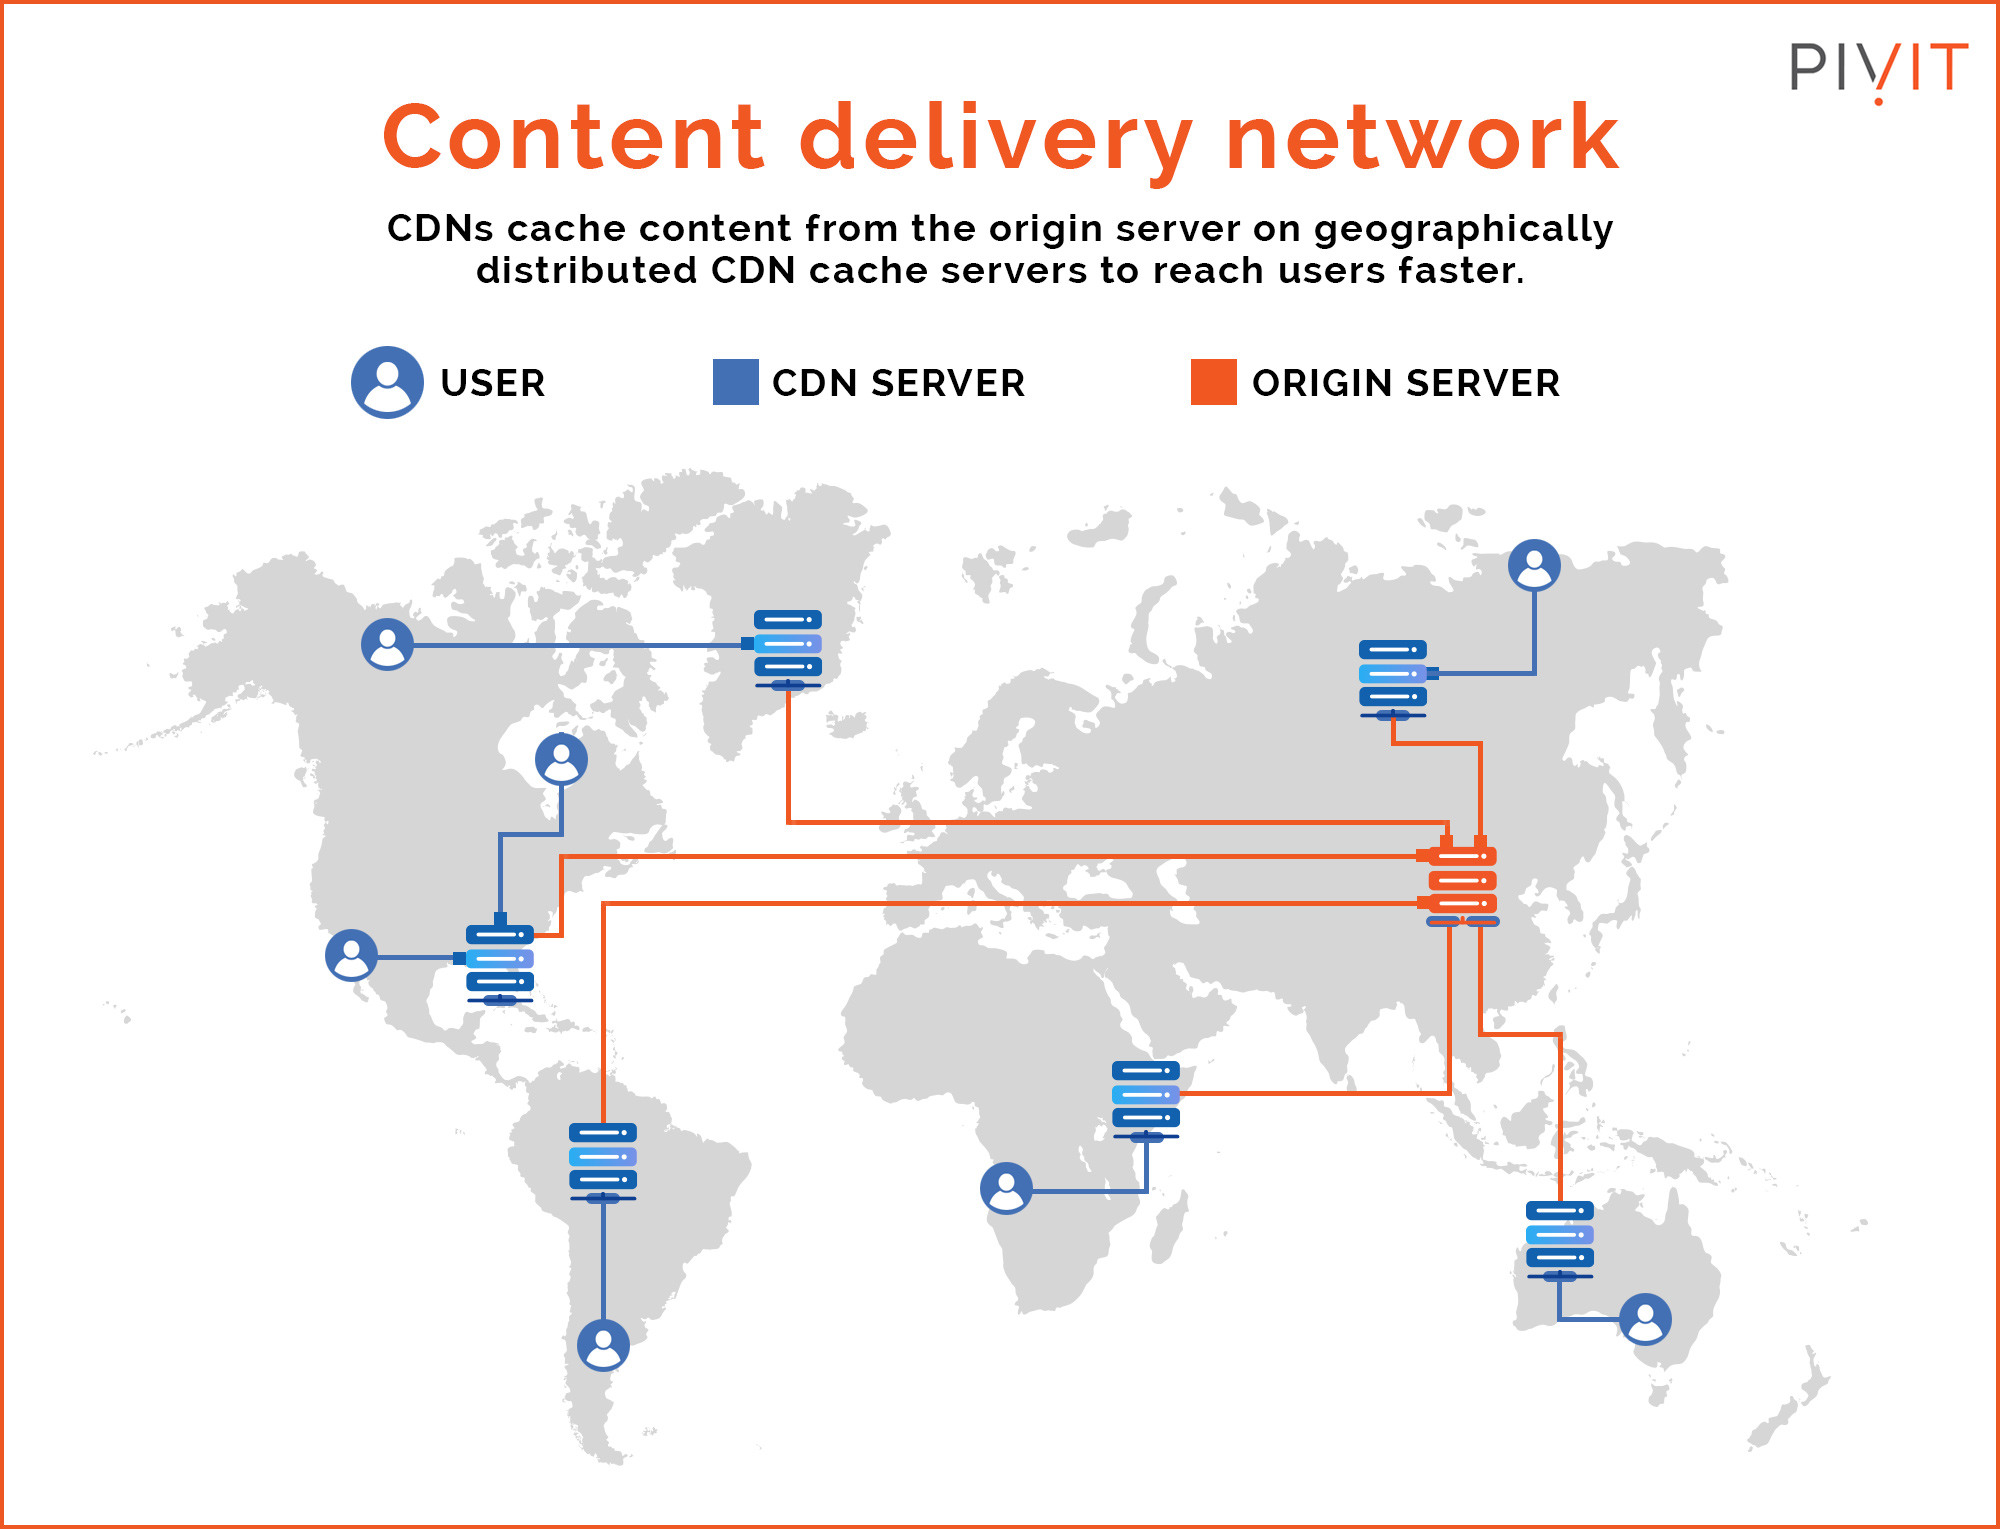 Content delivery global map showing user, CDN server, and origin server locations and connections